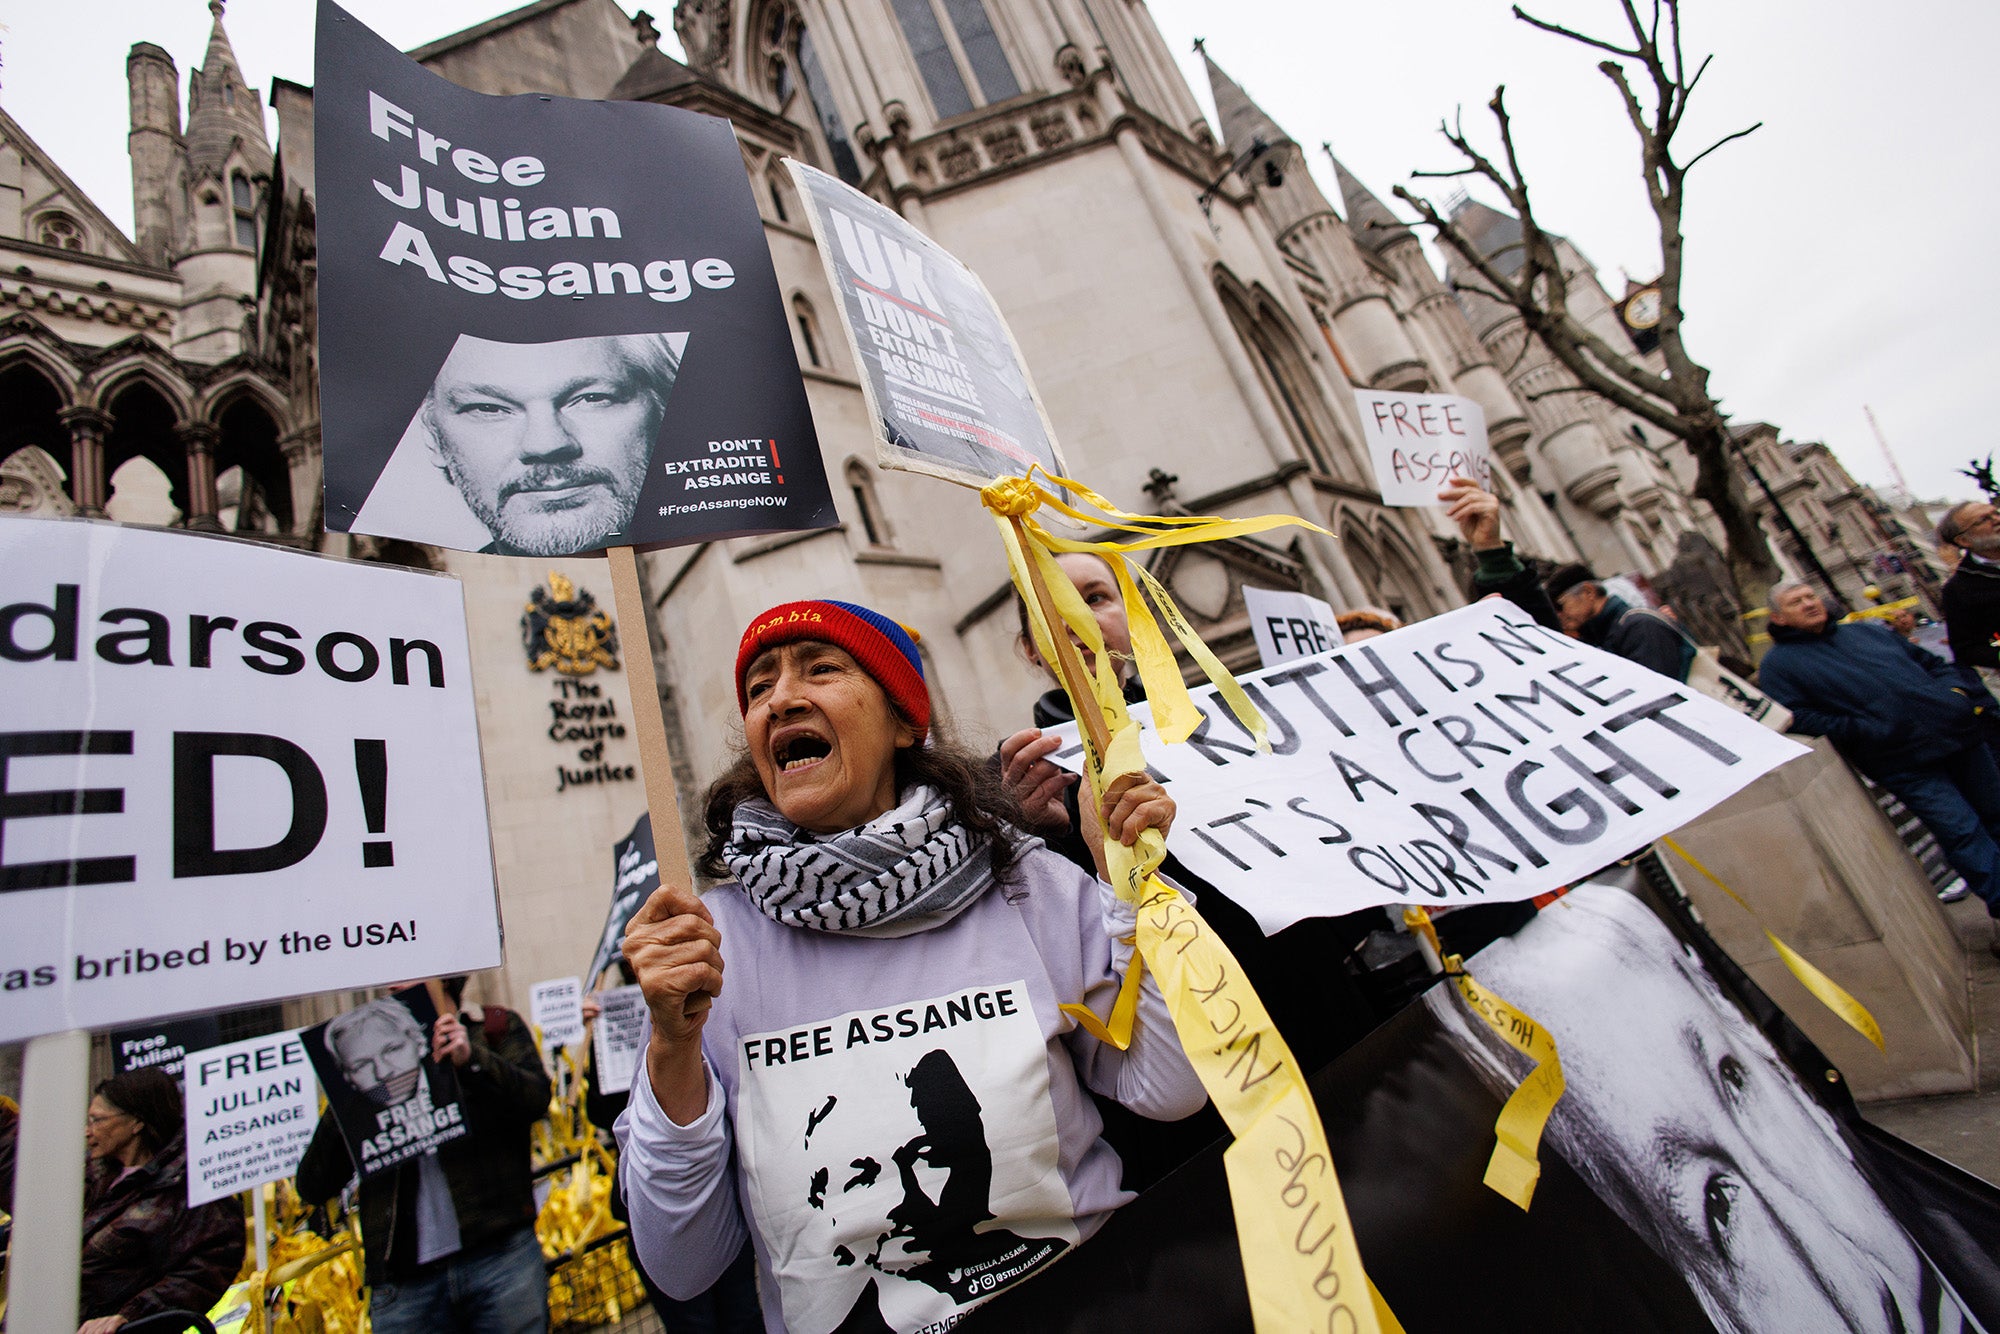 Supporters of WikiLeaks founder Julian Assange gather outside the Royal Courts of Justice